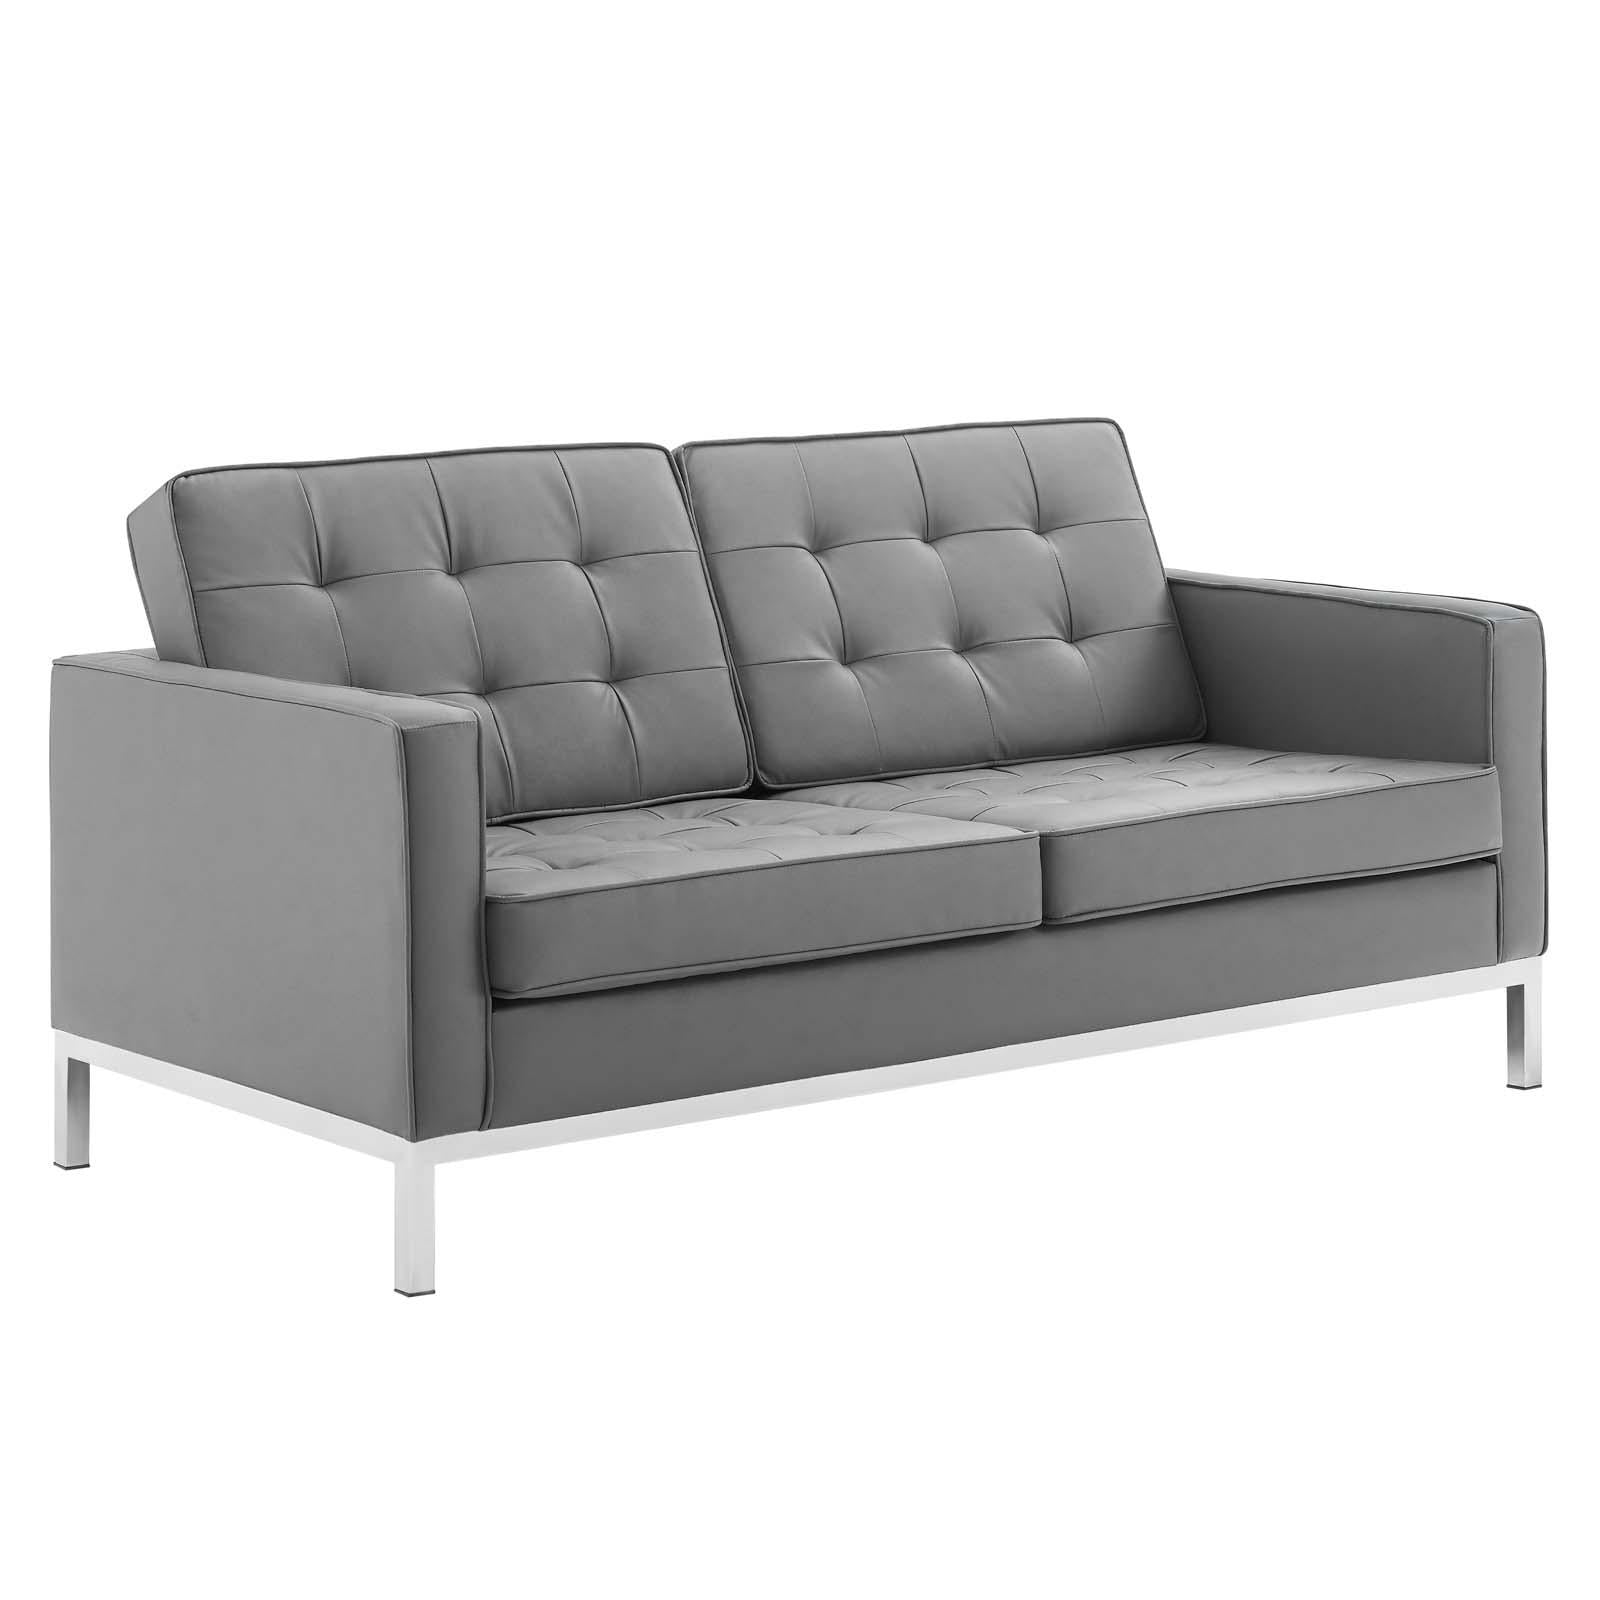 Modway Furniture Modern Loft Tufted Upholstered Faux Leather Sofa and Loveseat Set - EEI-4106